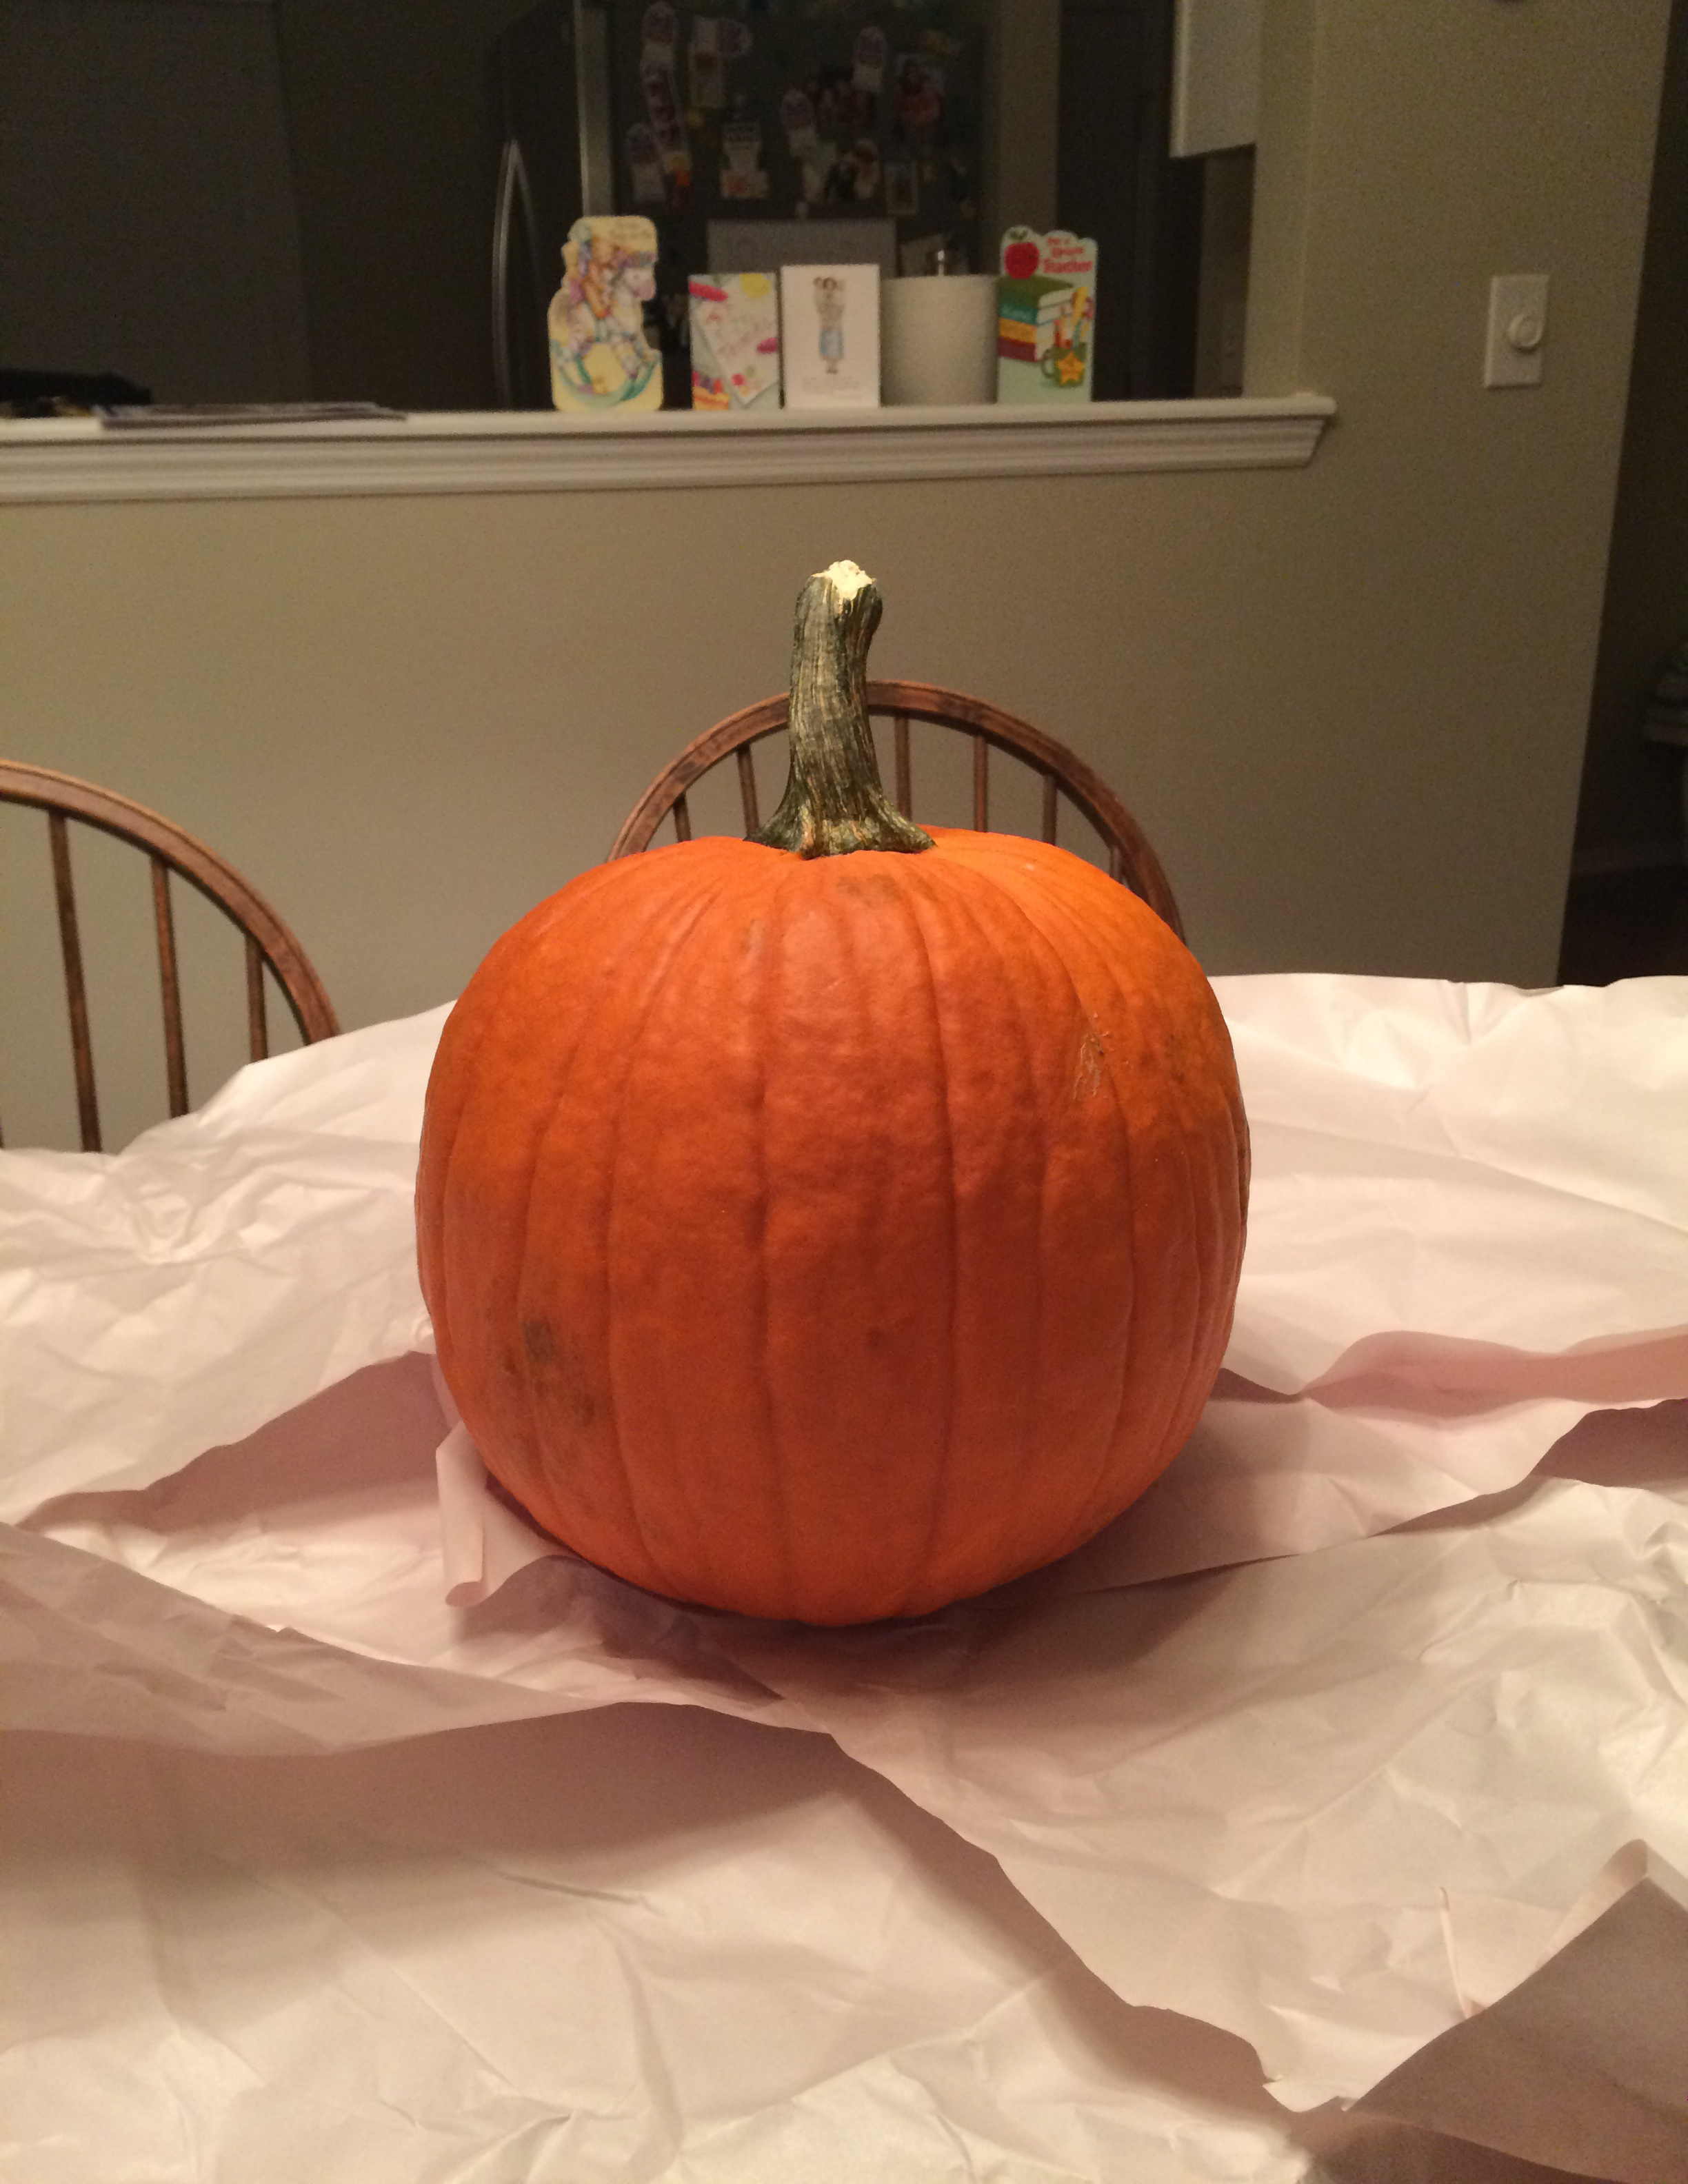 This is a look at our pumpkin right before we started carving it.